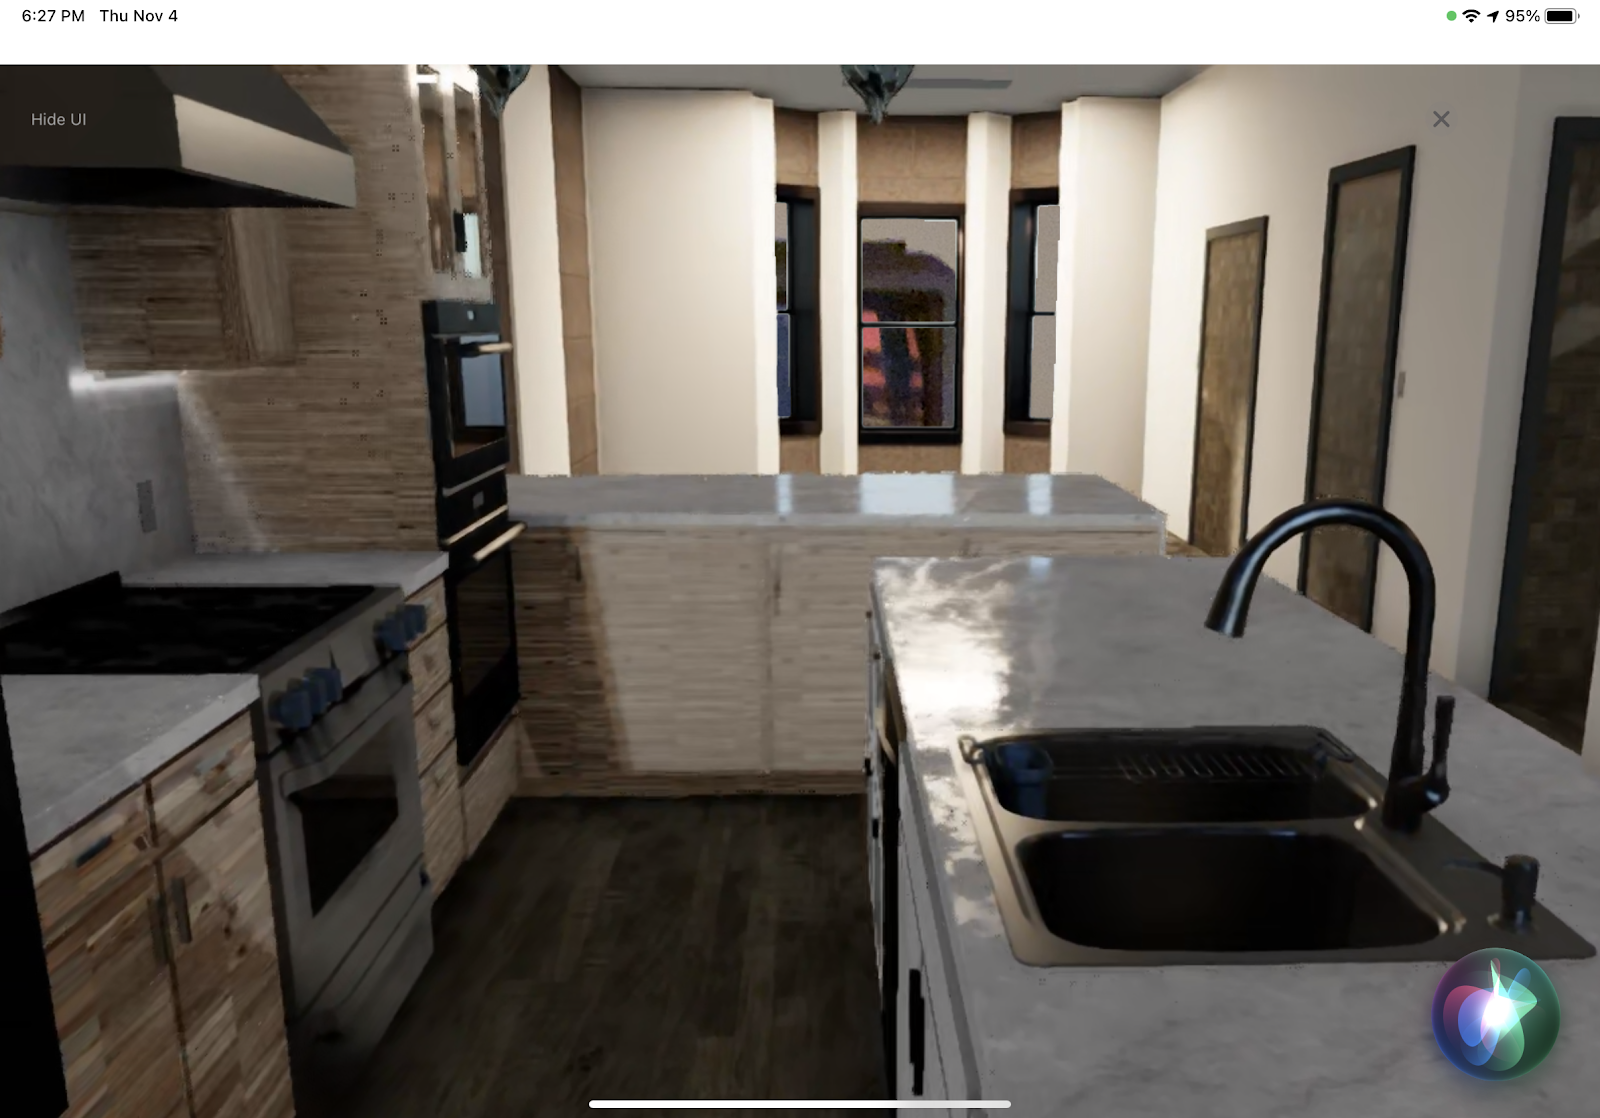 A highly detailed model of a kitchen is viewed using VR Virtual Camera mode in XR Remote.